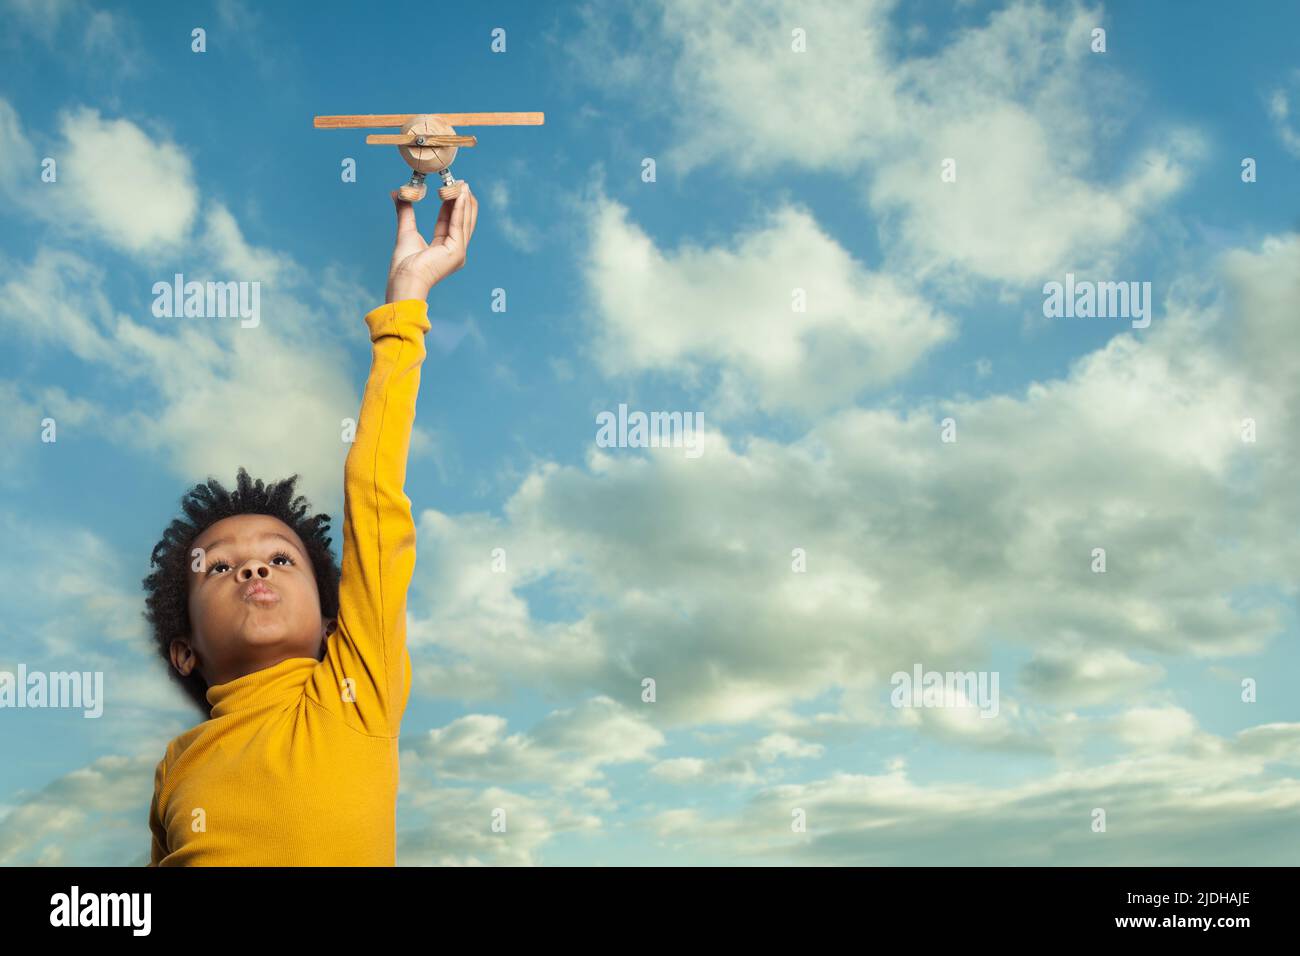 Curious small black child boy with airplane against blue sky clouds background Stock Photo